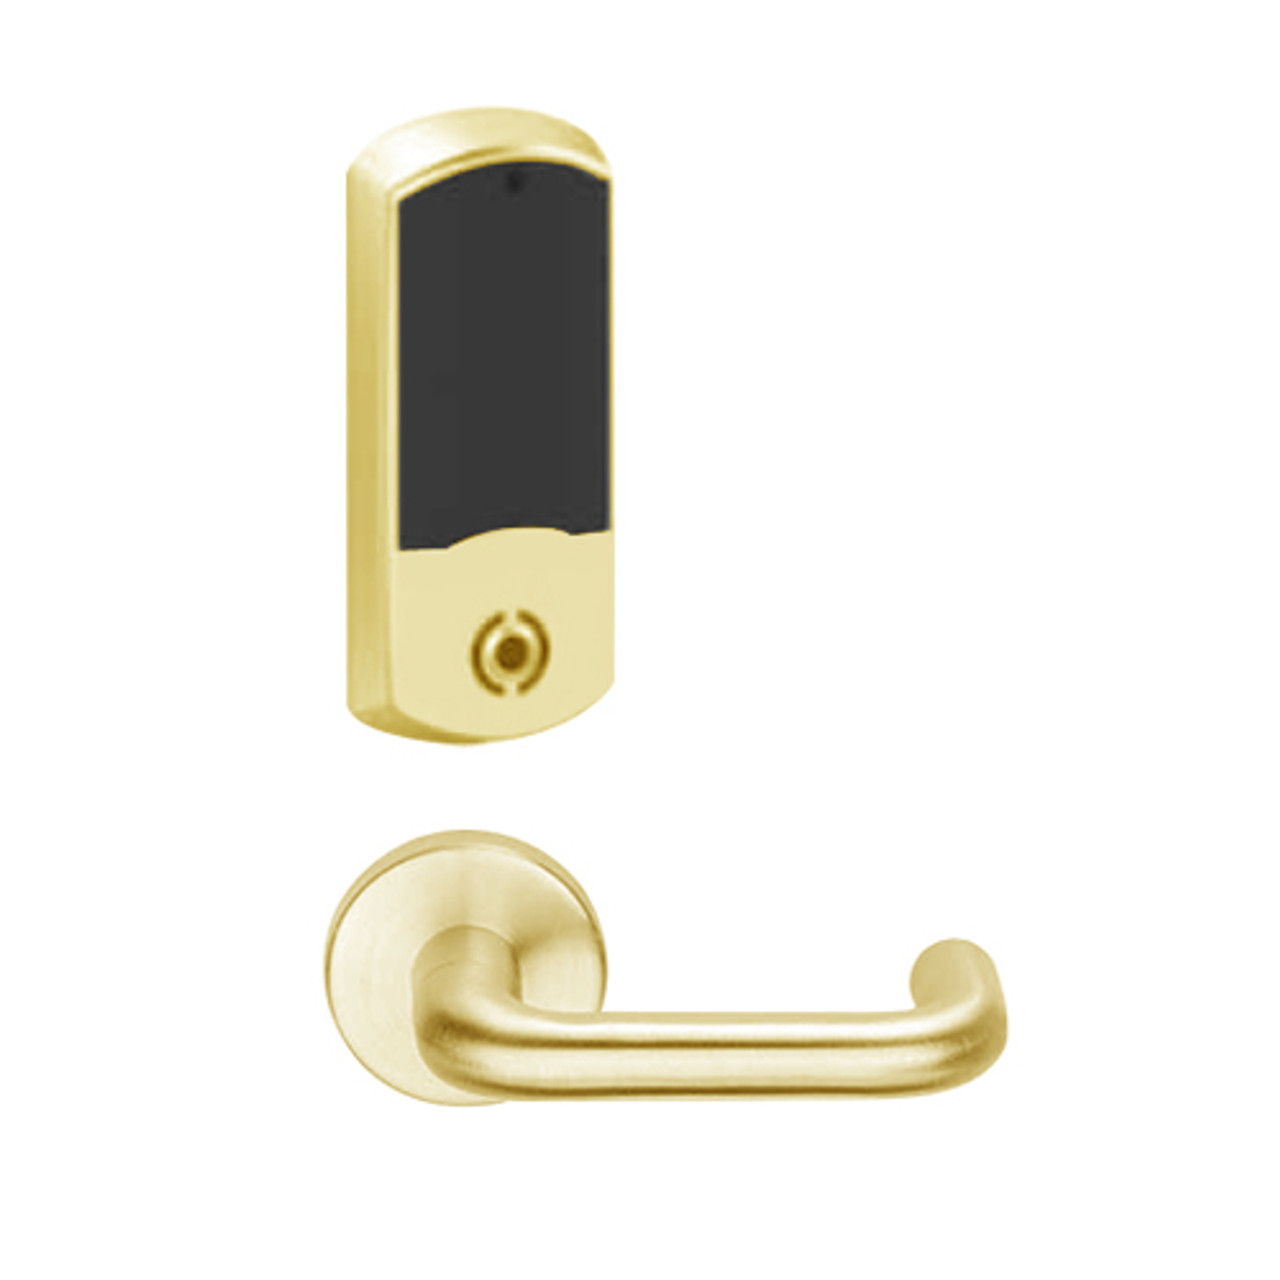 LEMS-GRW-P-03-605-00A Schlage Storeroom Wireless Greenwich Mortise Lock with LED Indicator and Tubular Lever in Bright Brass